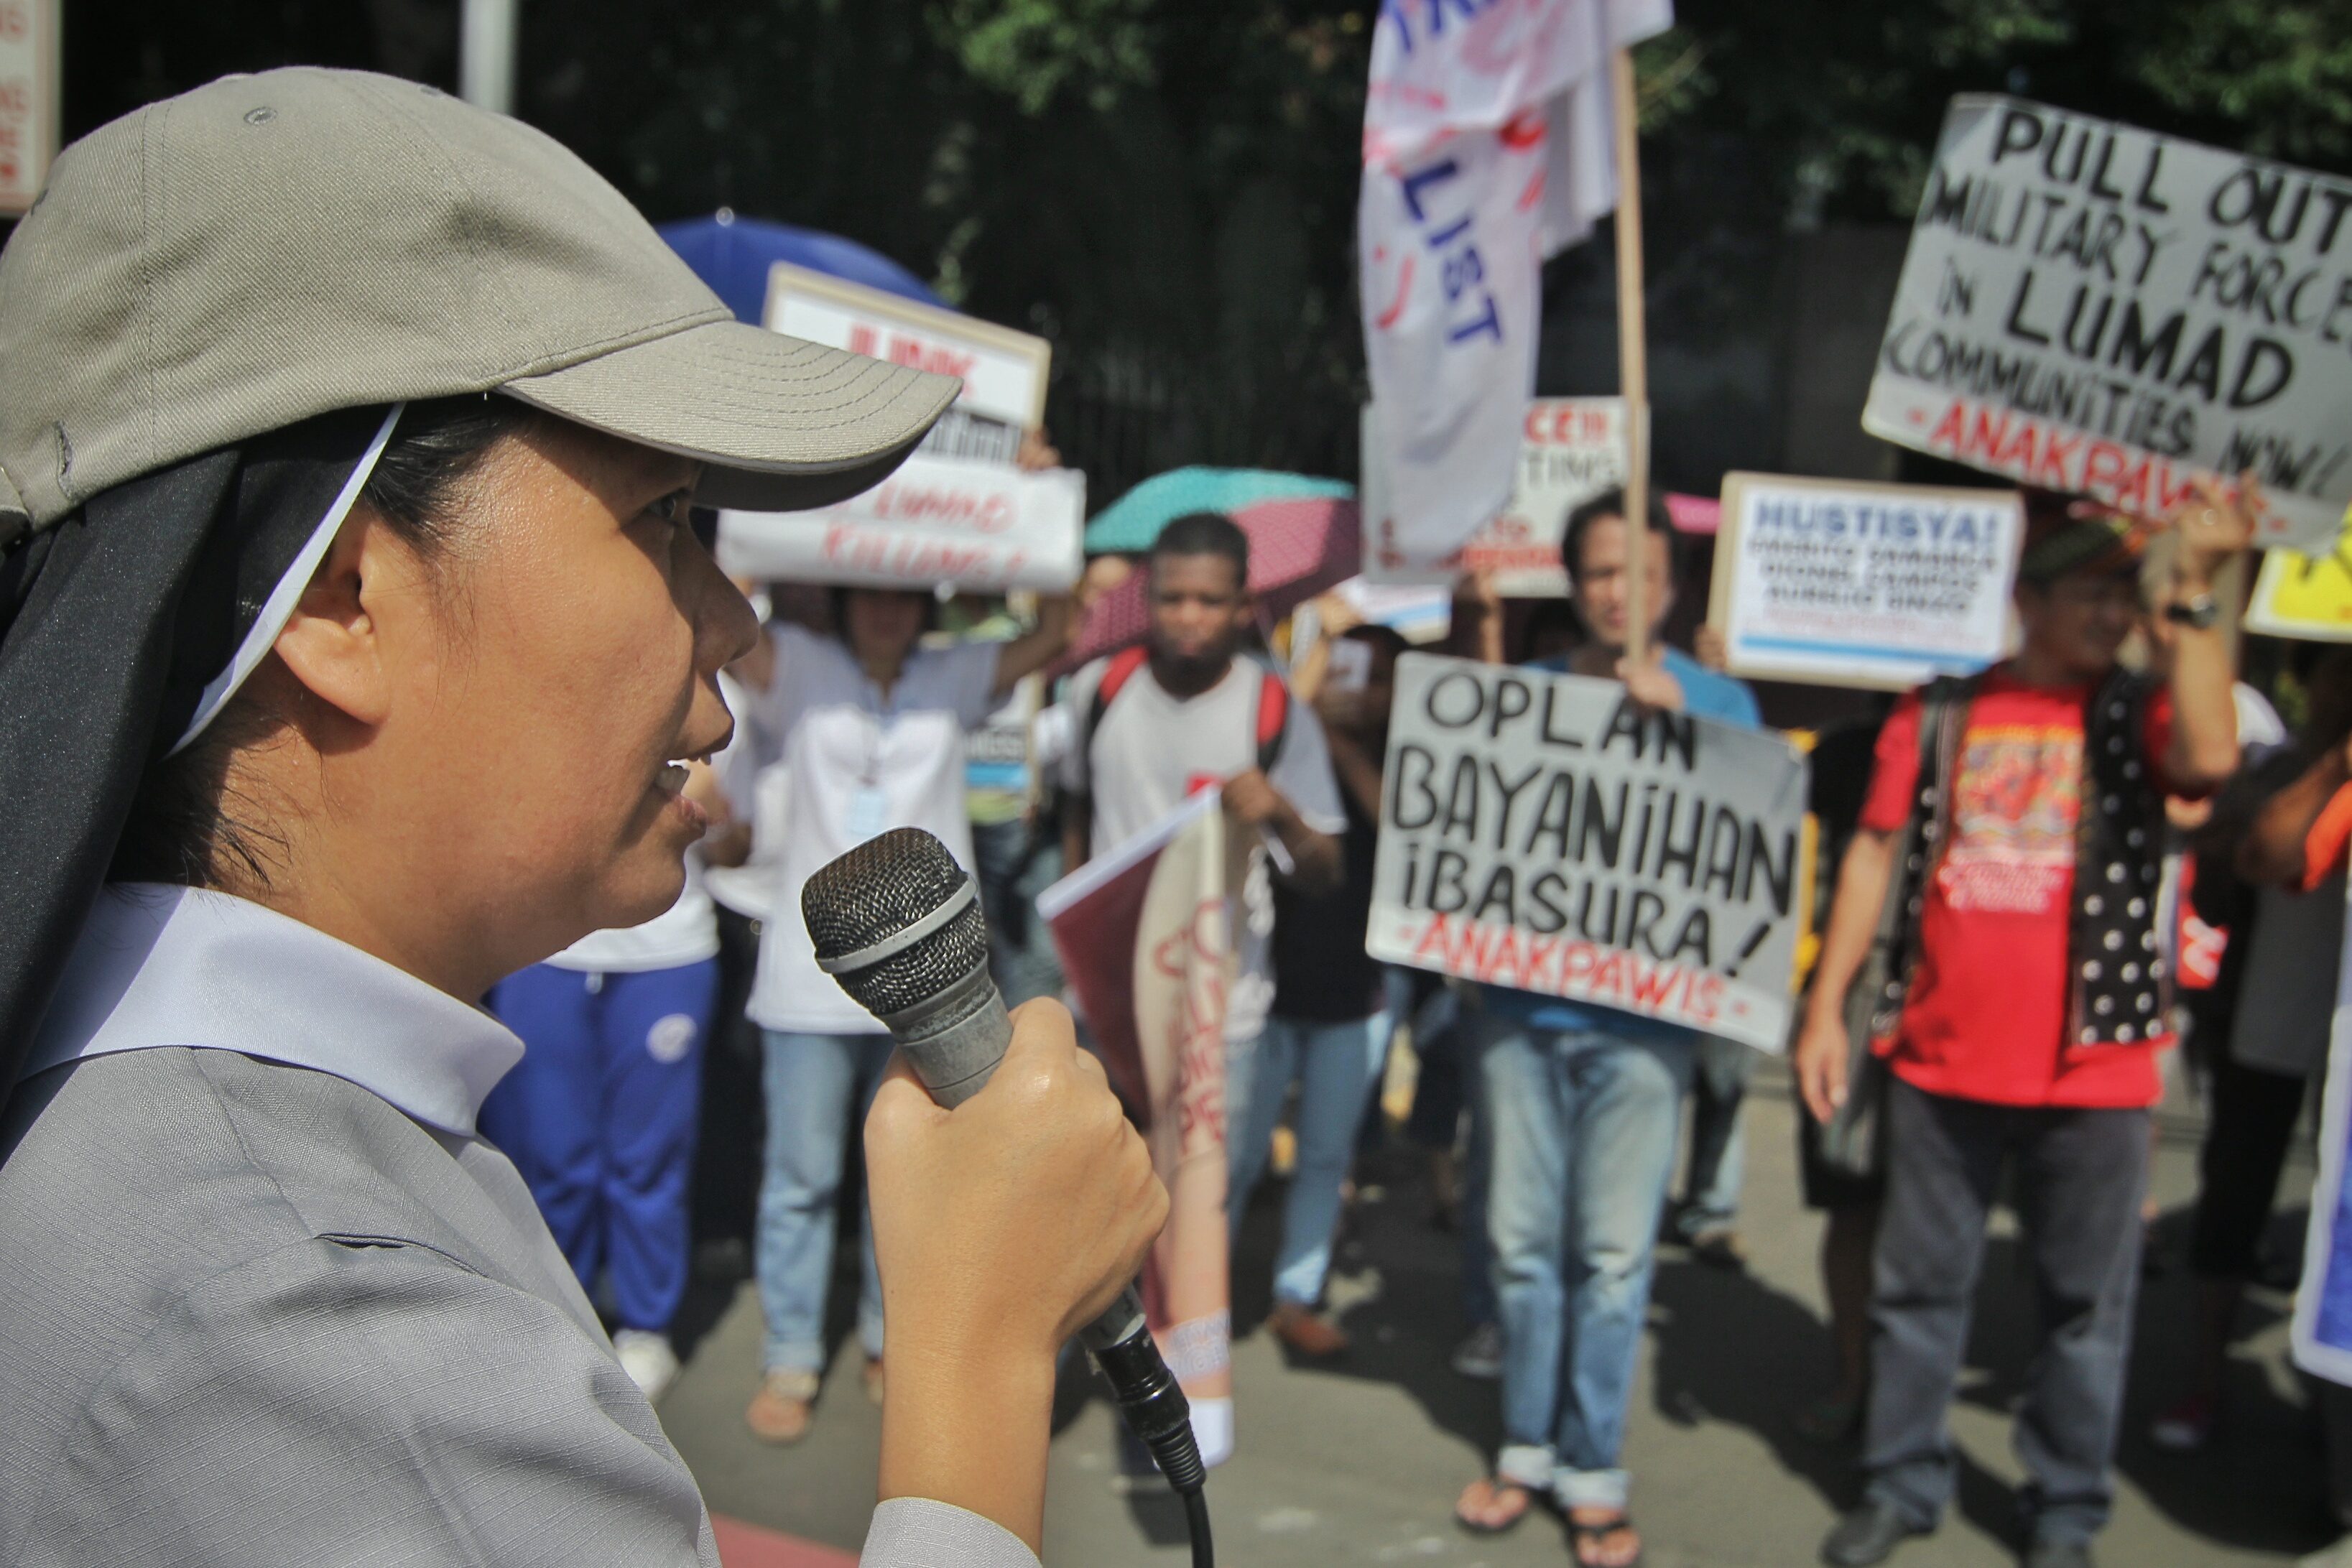 A nun gives a speech in support of Lumad groups. Photo by Vincent Go/Rappler 